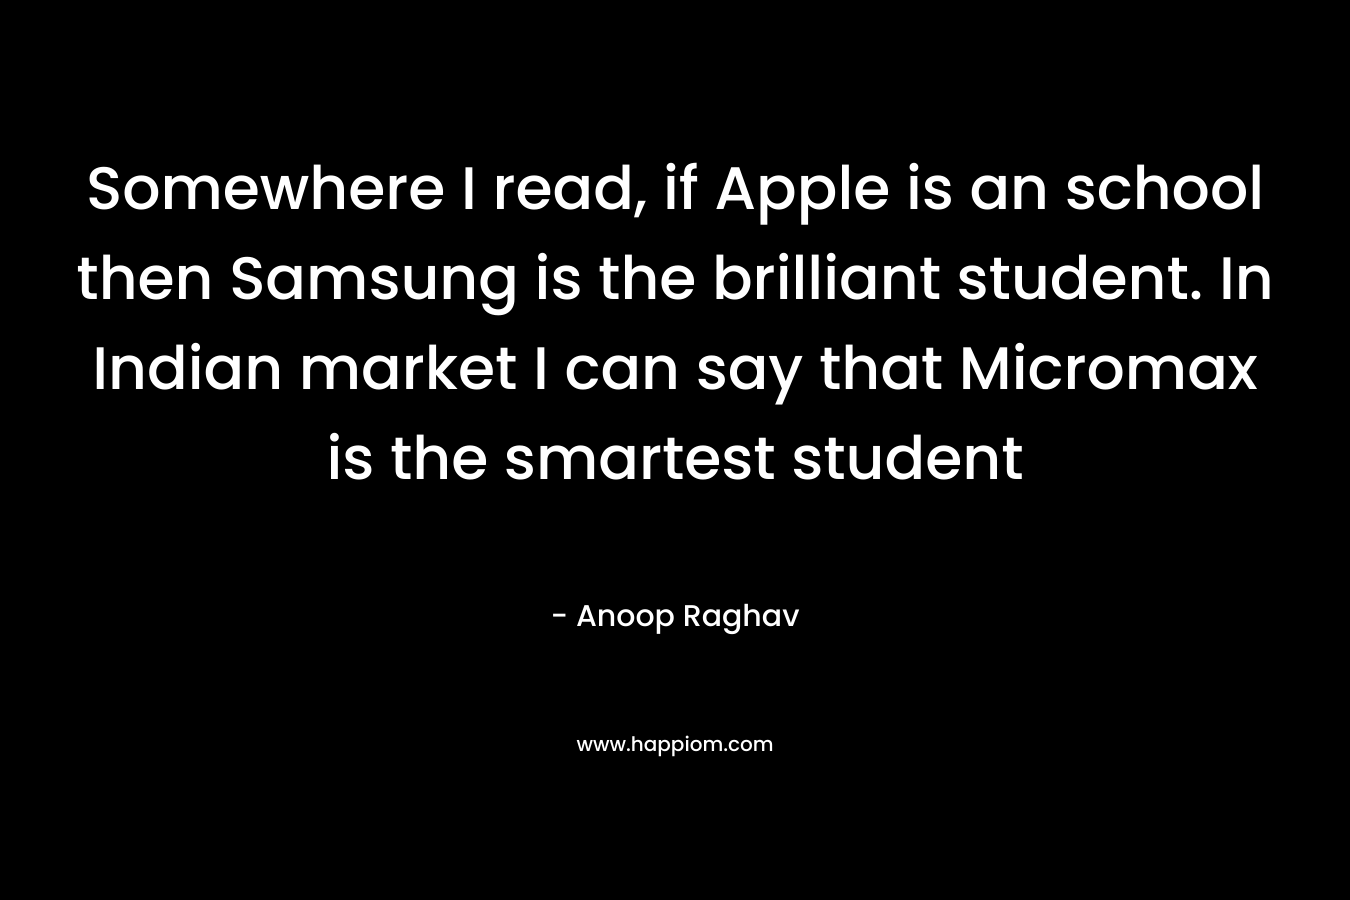 Somewhere I read, if Apple is an school then Samsung is the brilliant student. In Indian market I can say that Micromax is the smartest student – Anoop Raghav